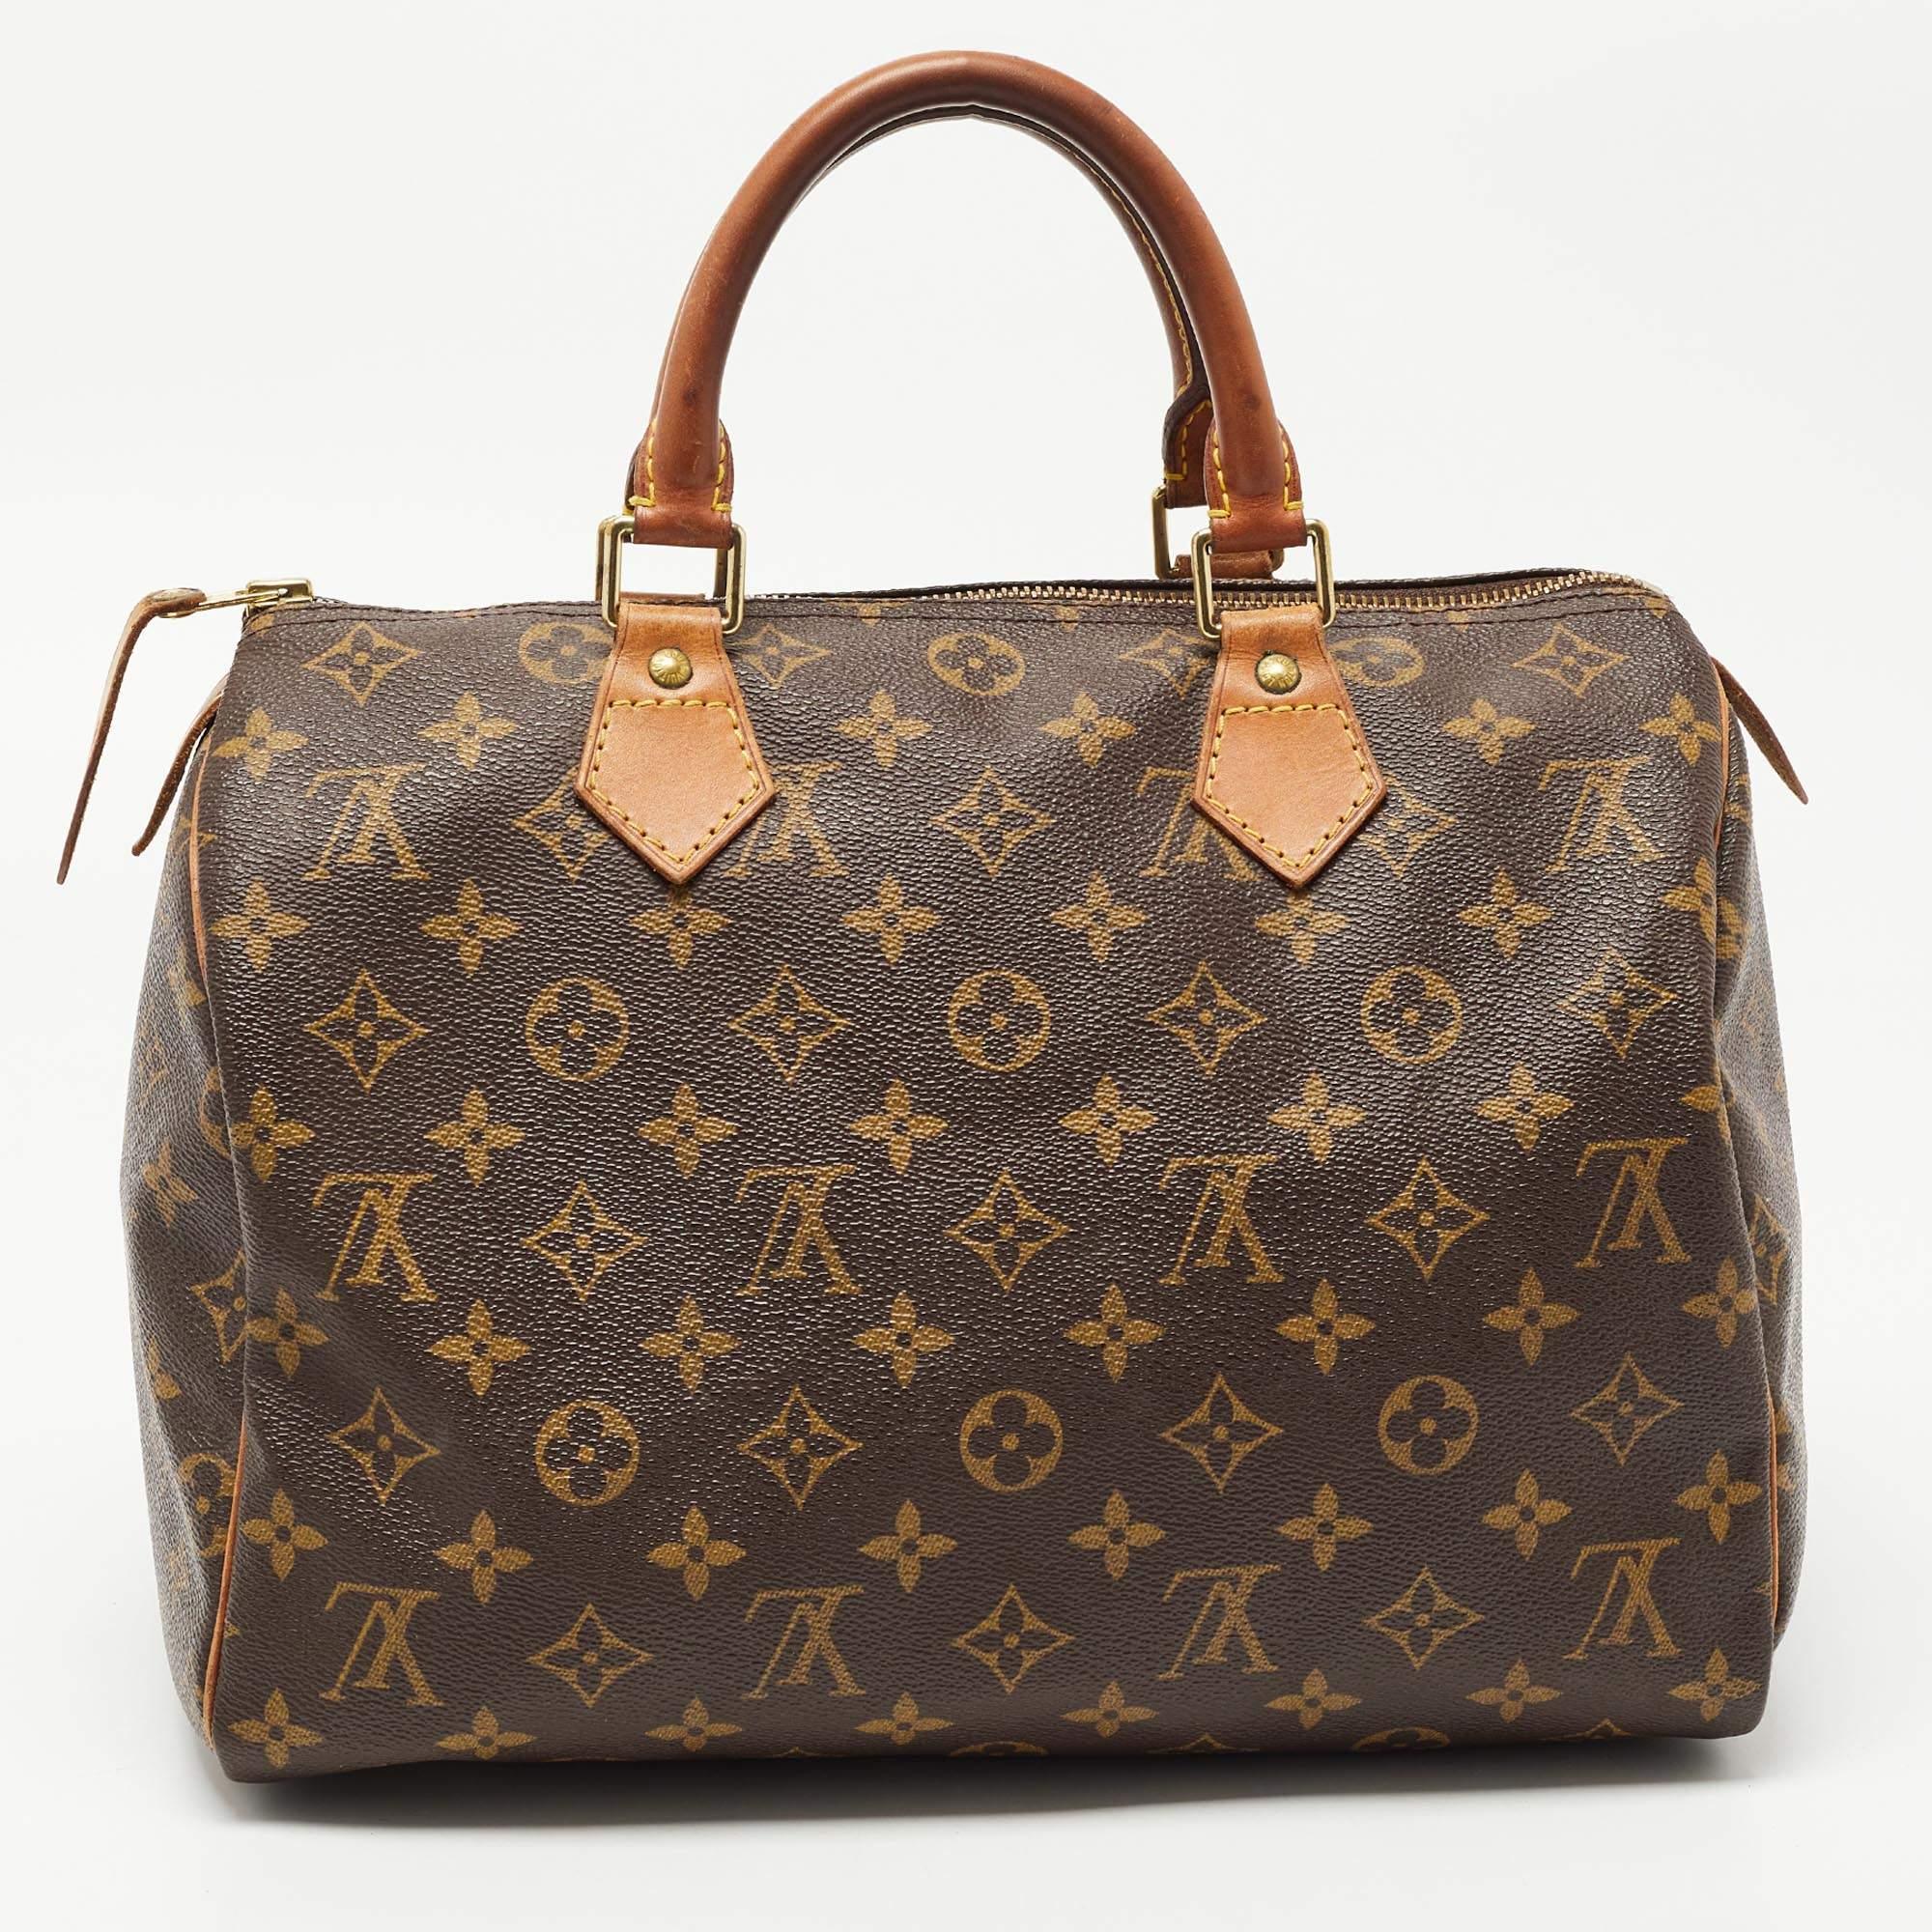 Created to provide you with everyday ease, this Louis Vuitton Speedy 30 bag features dual top handles and a roomy fabric-lined interior. The usage of monogram canvas in its construction offers it a classy and sophisticated look. Gold-tone hardware